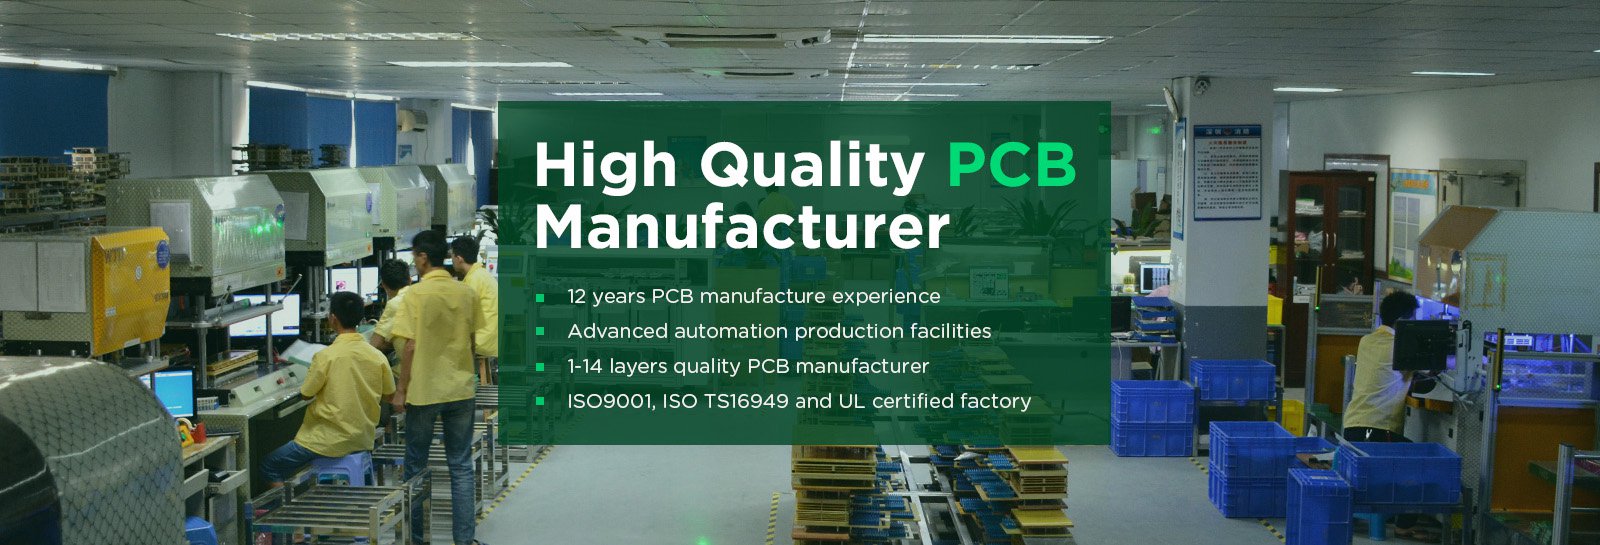 High Quality PCB Manufacturer